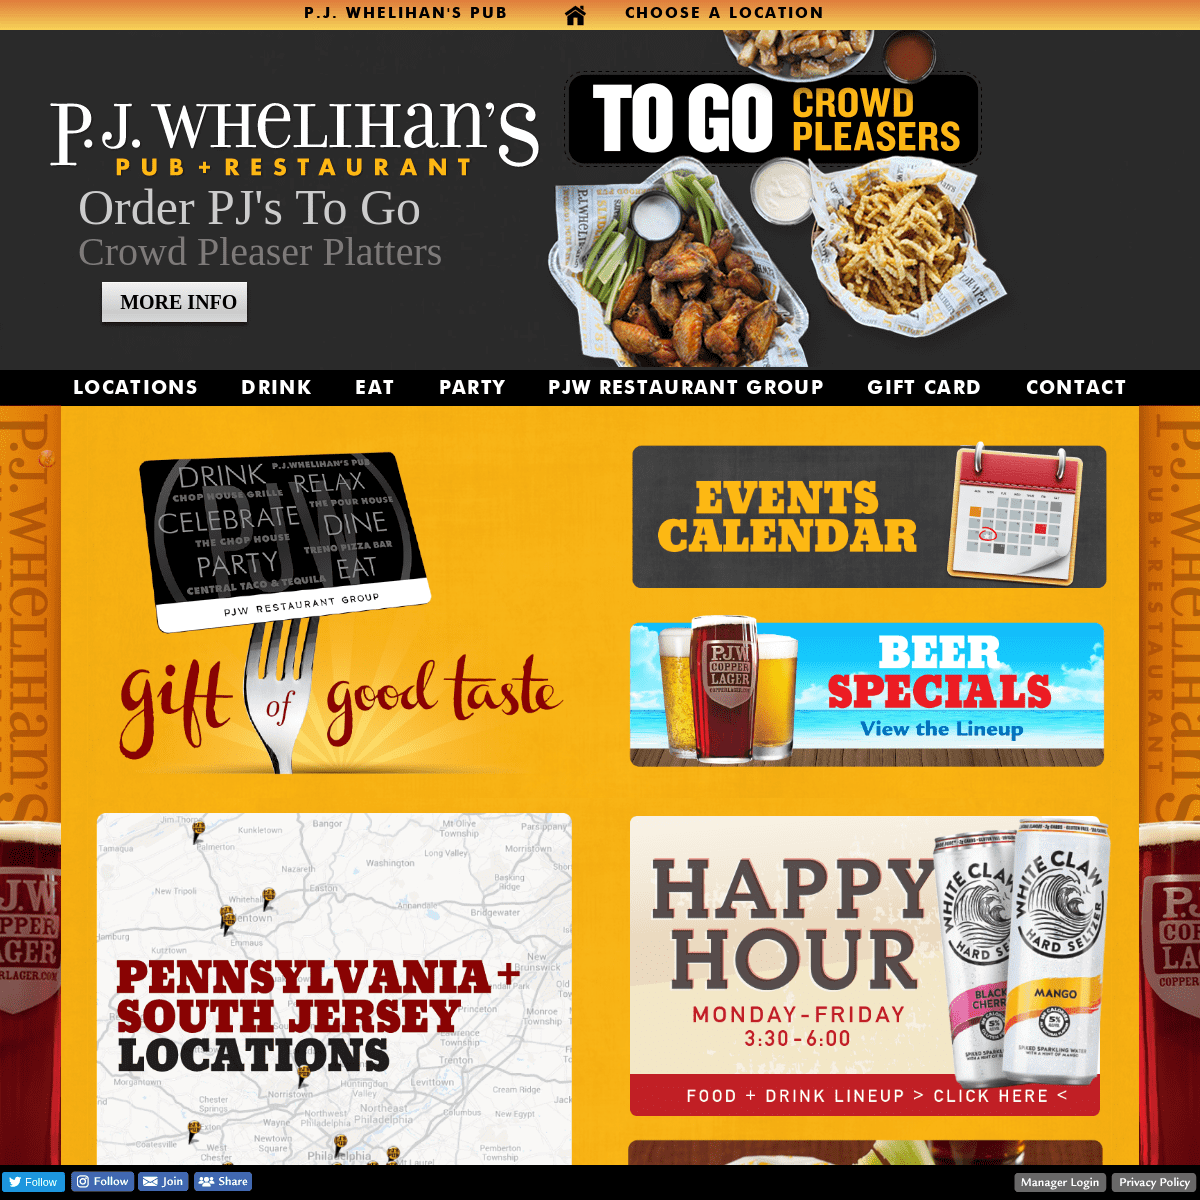 P.J. Whelihan's Pub + Restaurant : Home : Buffalo Wings, Sports Bars, Food To Go, Private Parties, Restaurant Gift Cards, Mobile